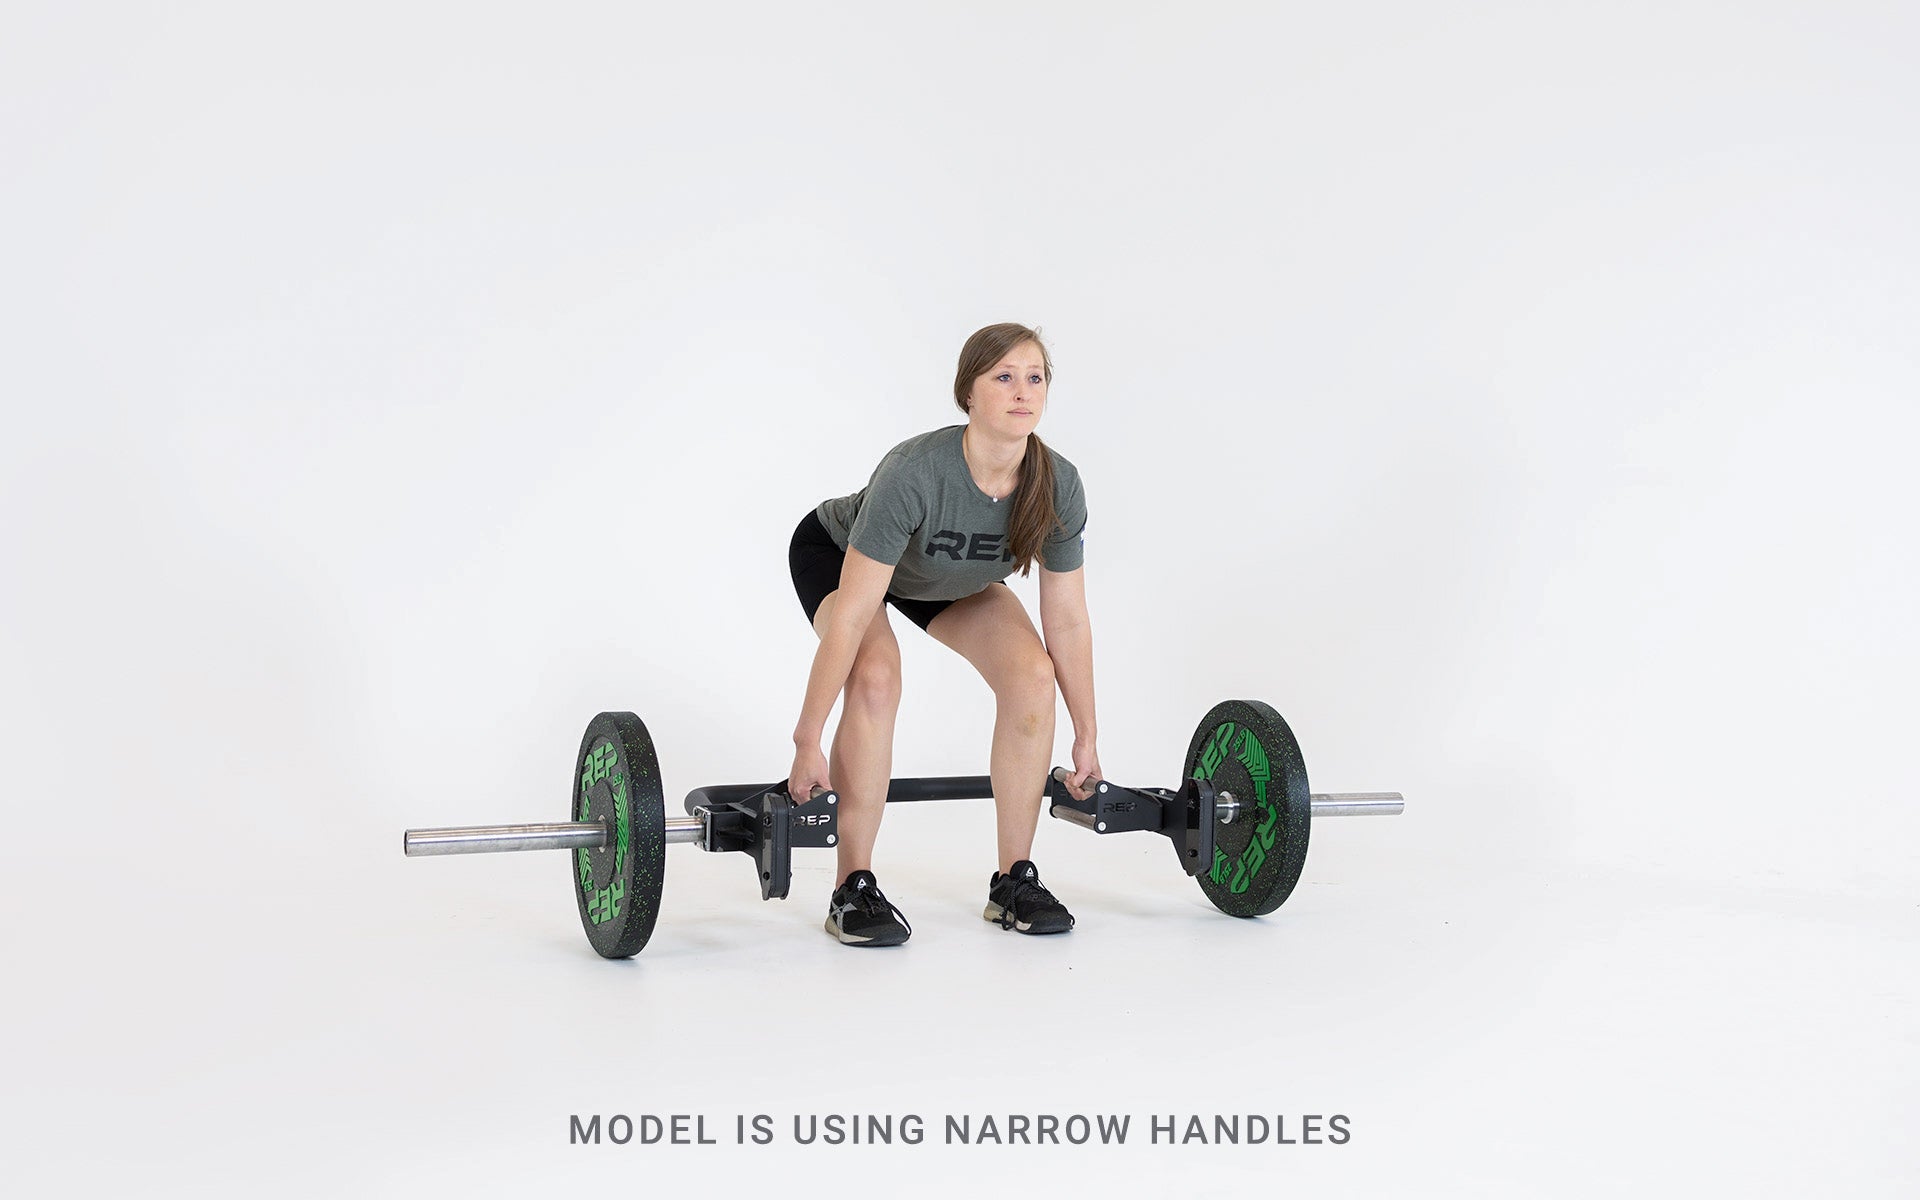 Lifter set up for a deadlift using the open trap bar with narrow handles.